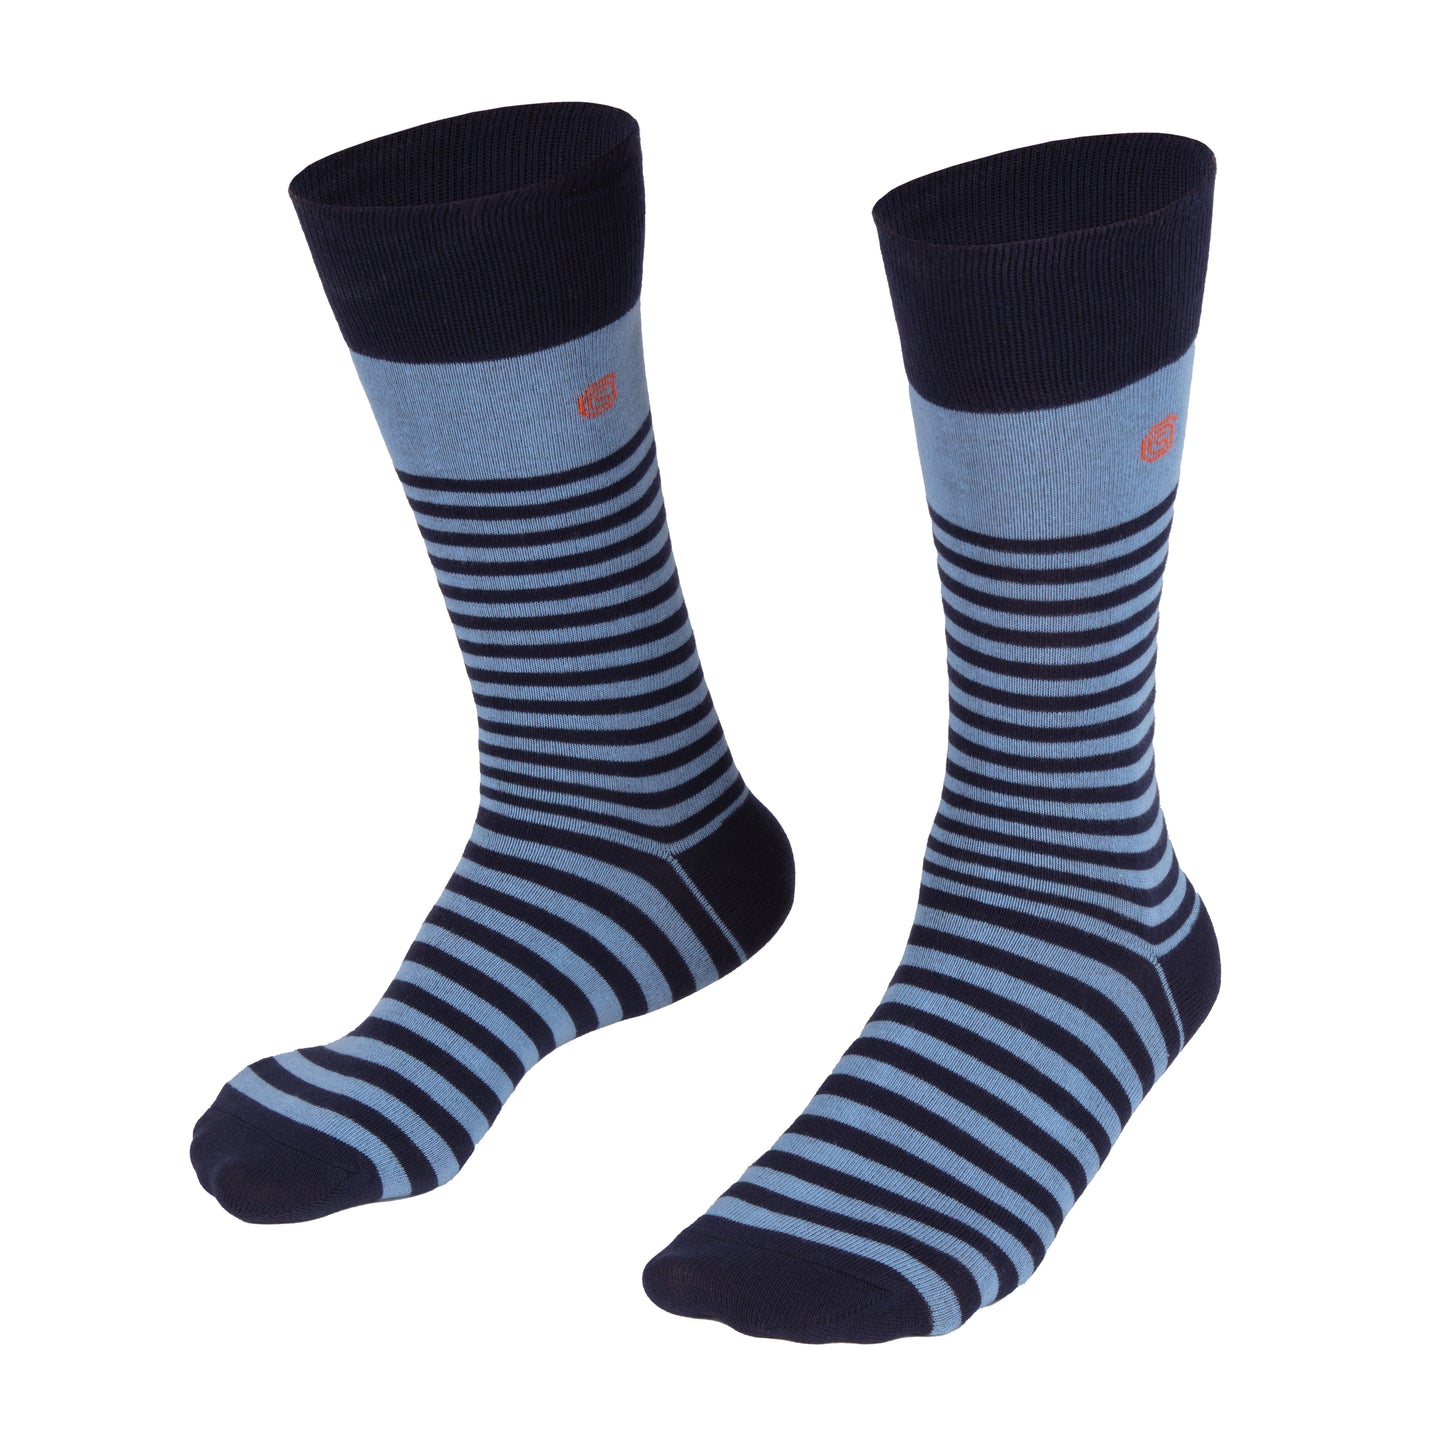 Royal blue striped high, classic, crew length socks – 3 or 6 pairs pack